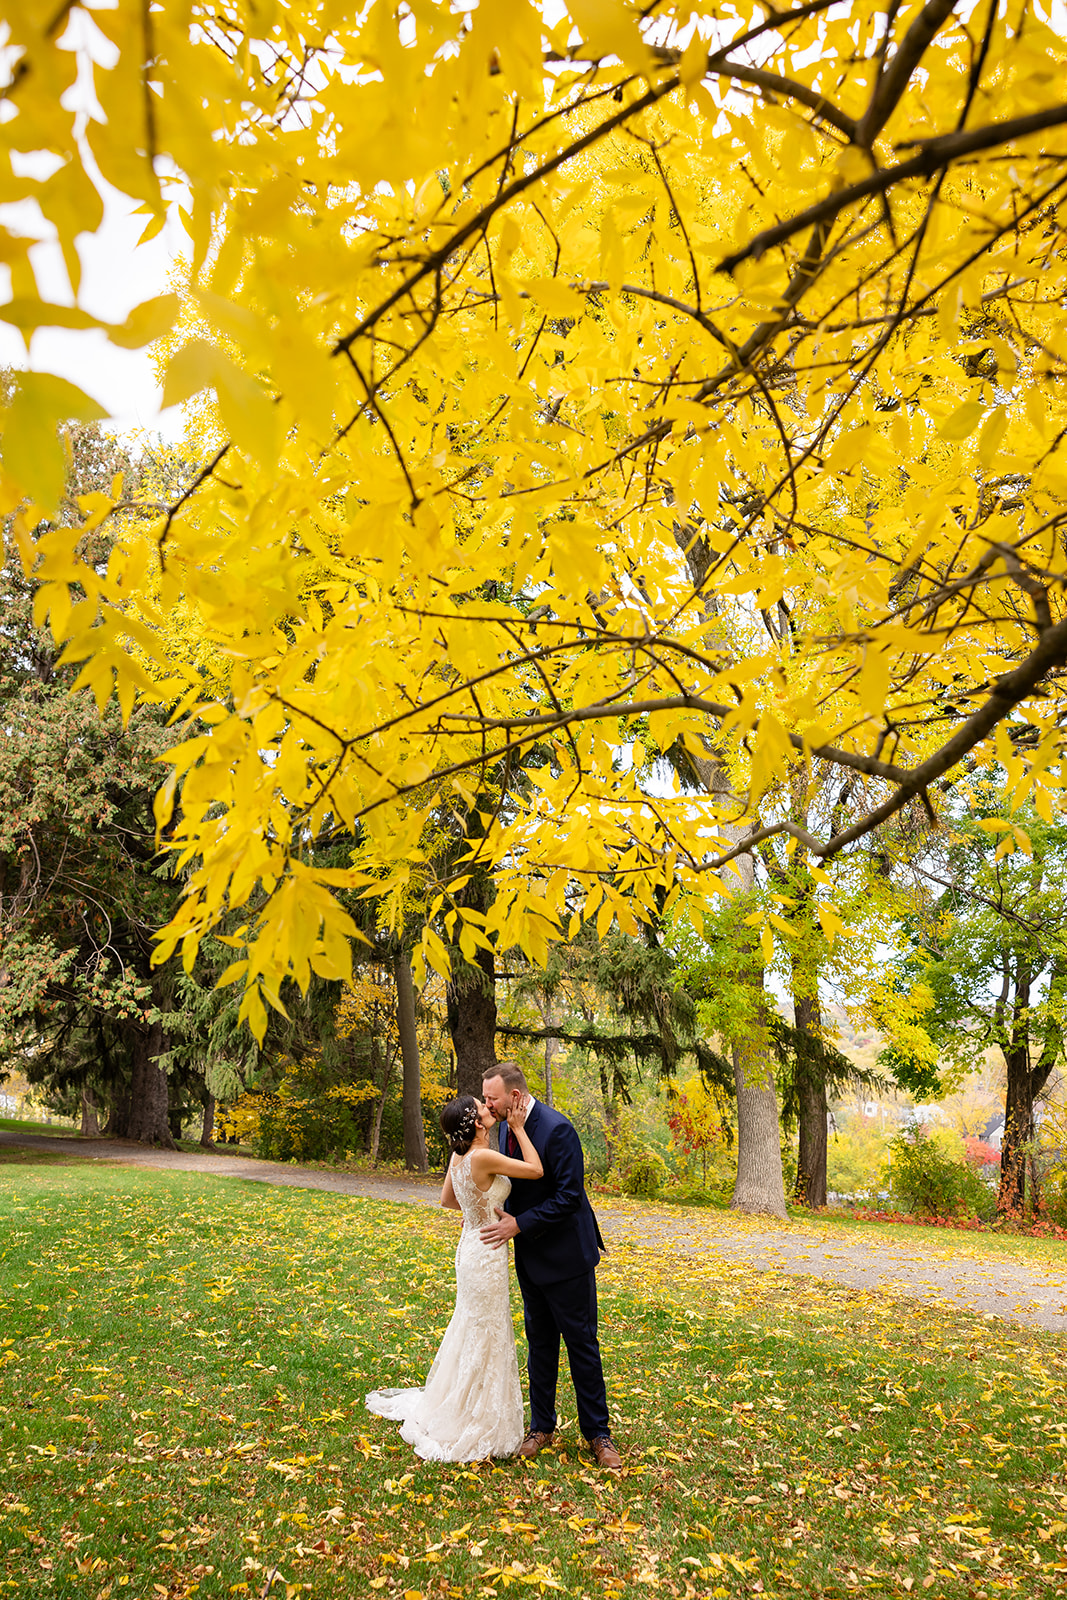 Fall Bride and Groom Portrait under a yellow tree